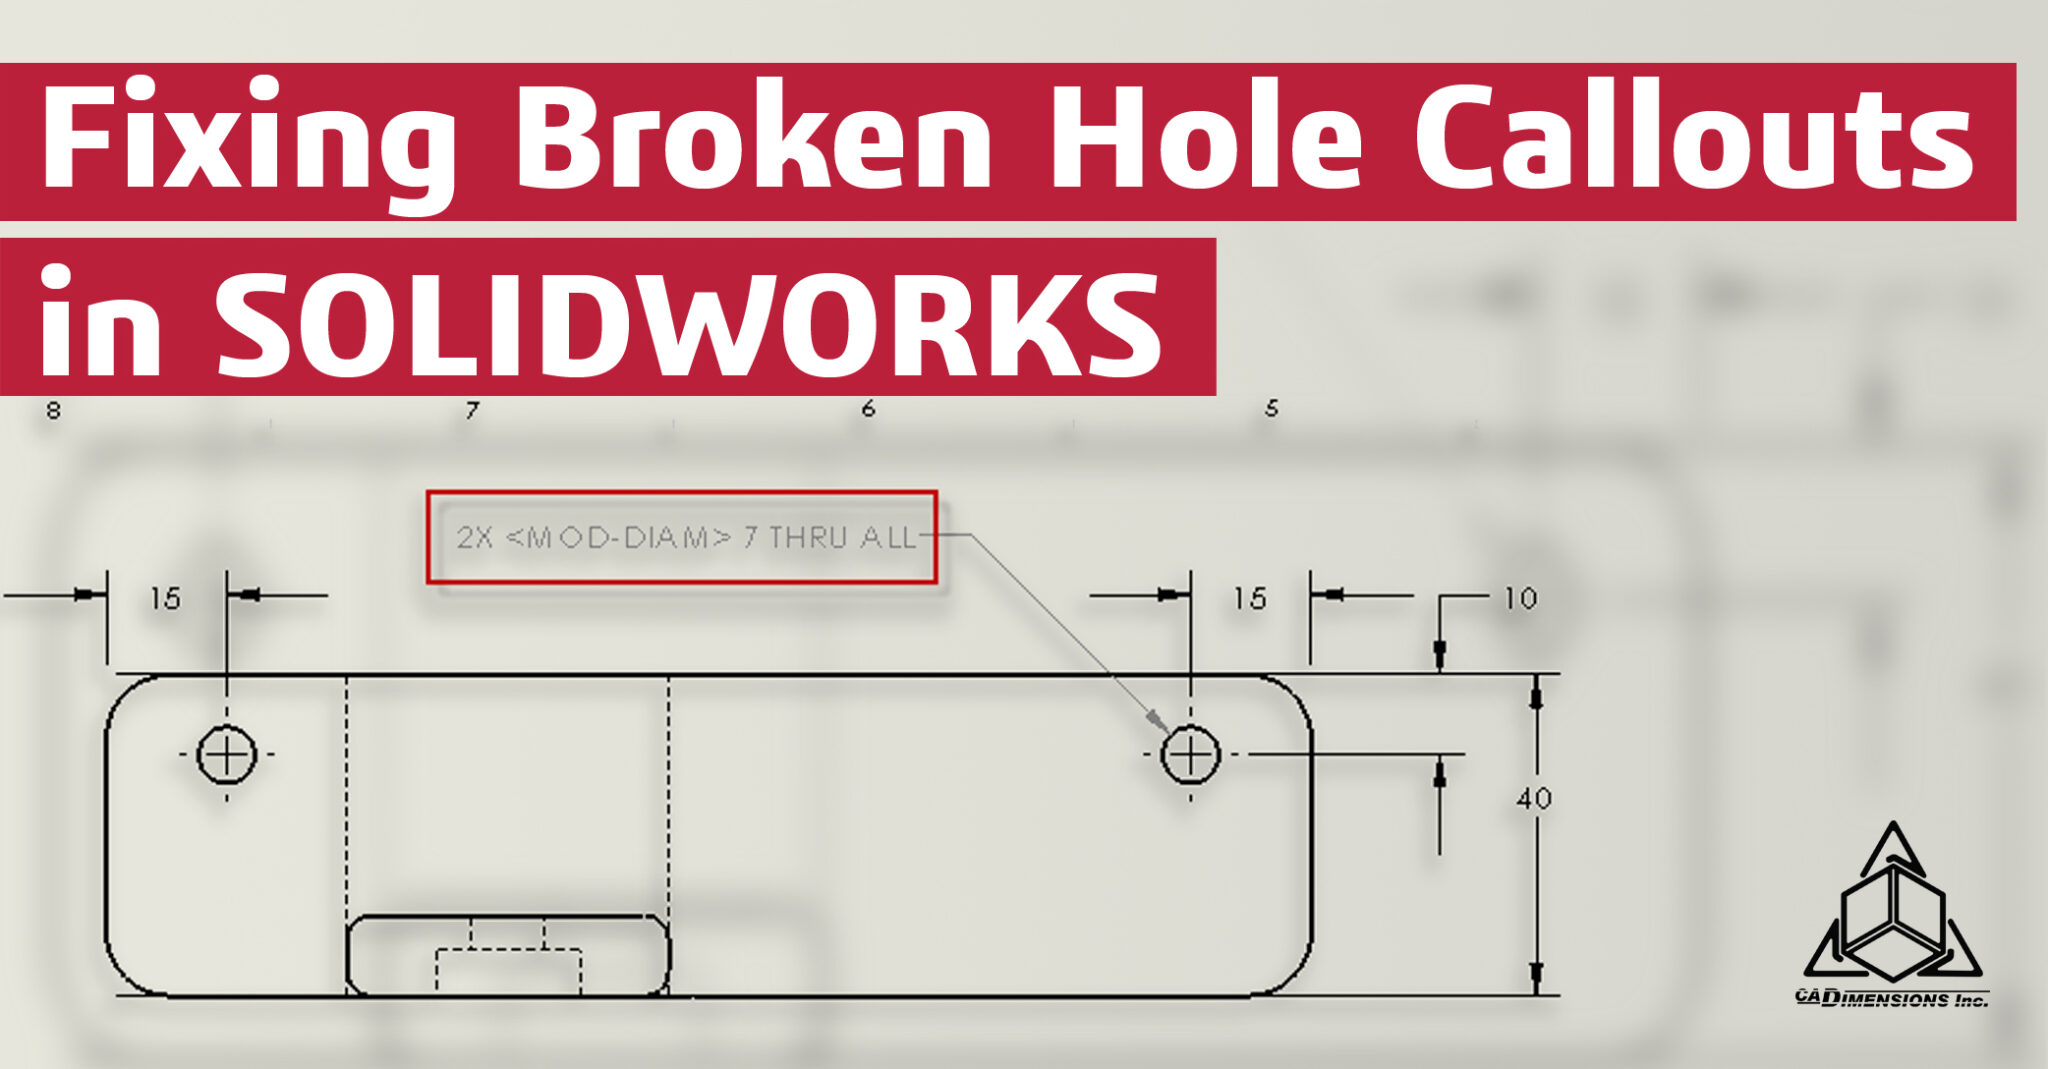 fixing broken hole callouts in solidworks with CADimensions